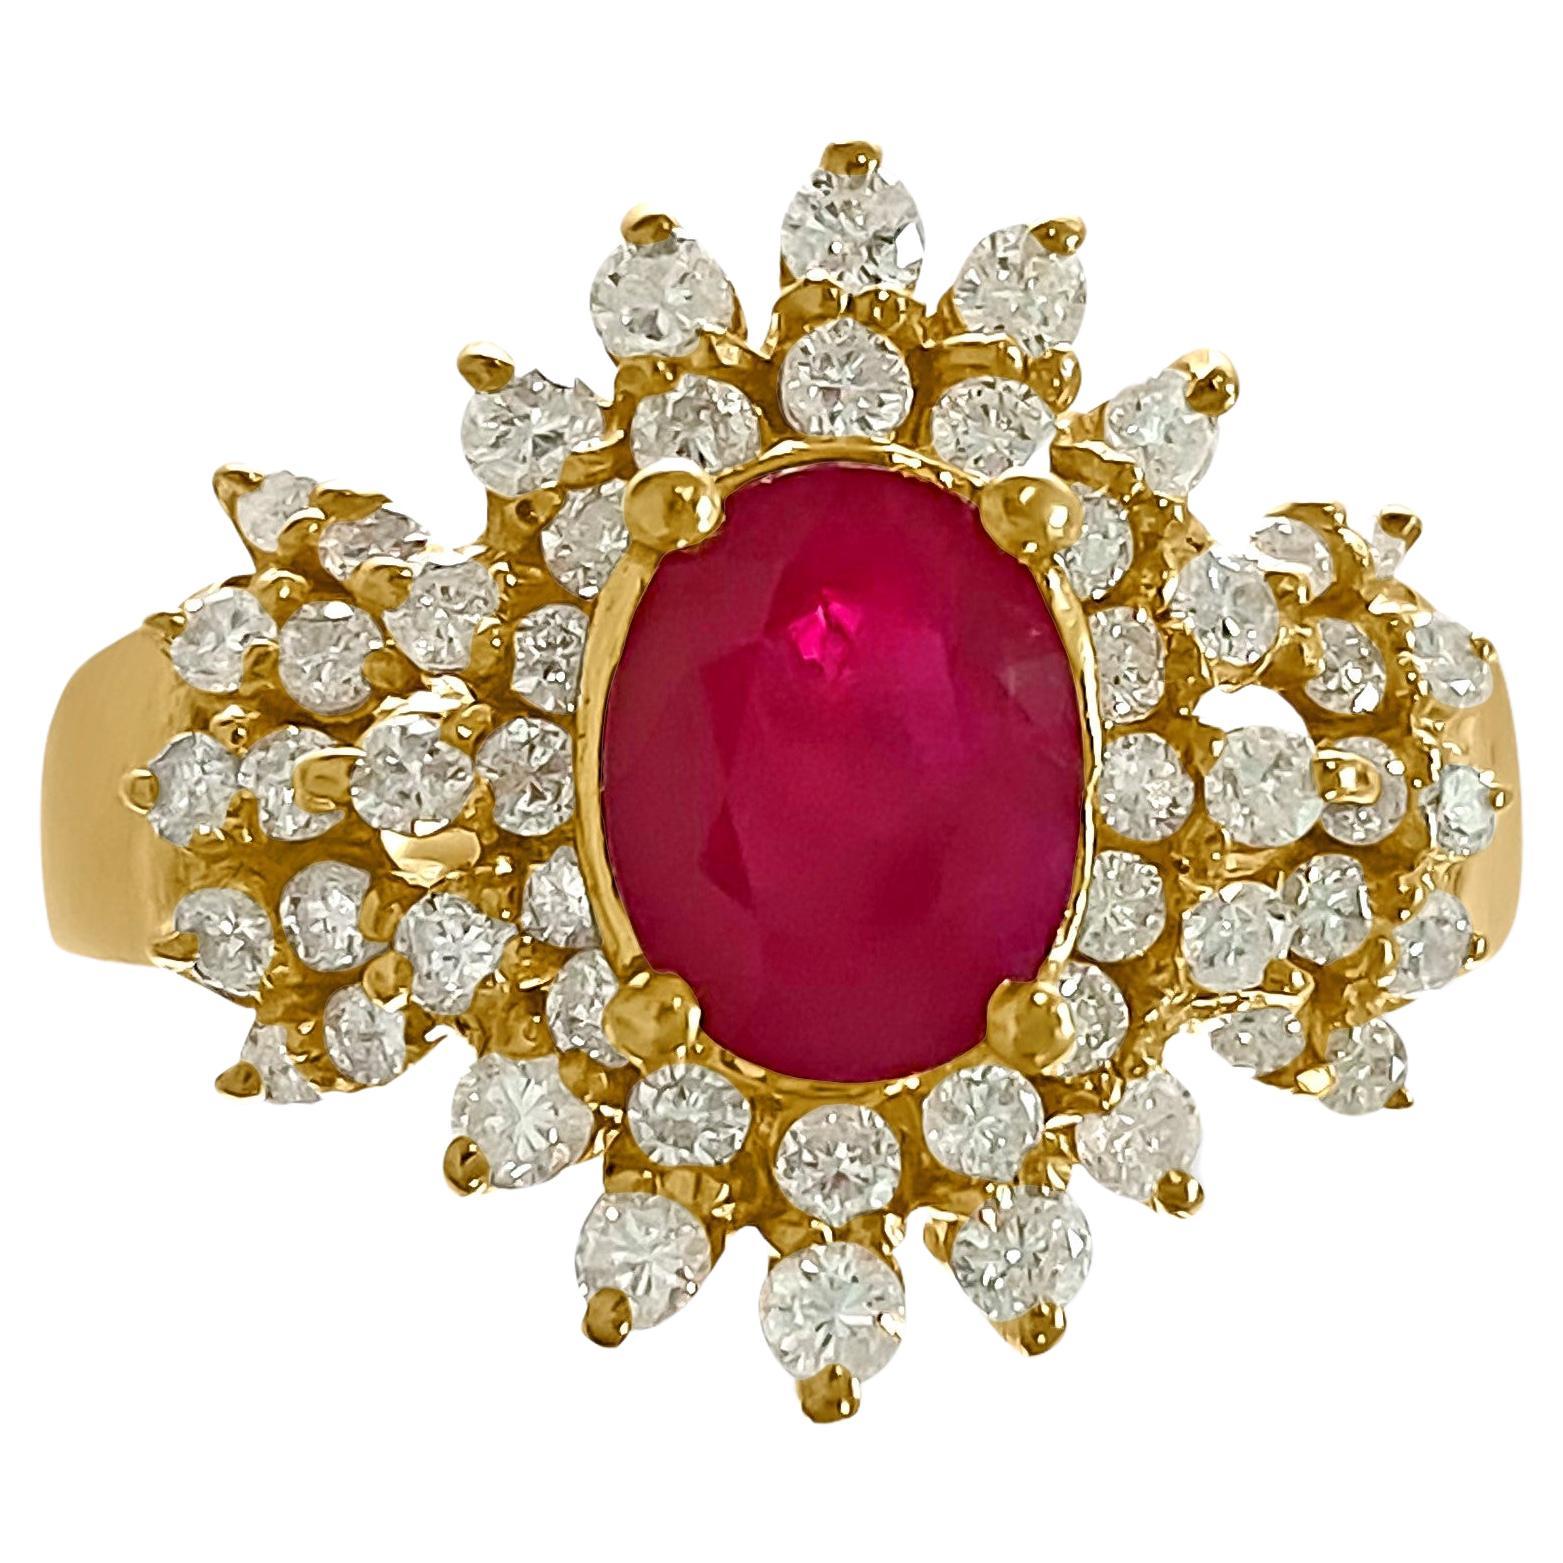 Certified 2.00 Carat Natural Burma Ruby Diamond Ring For Sale